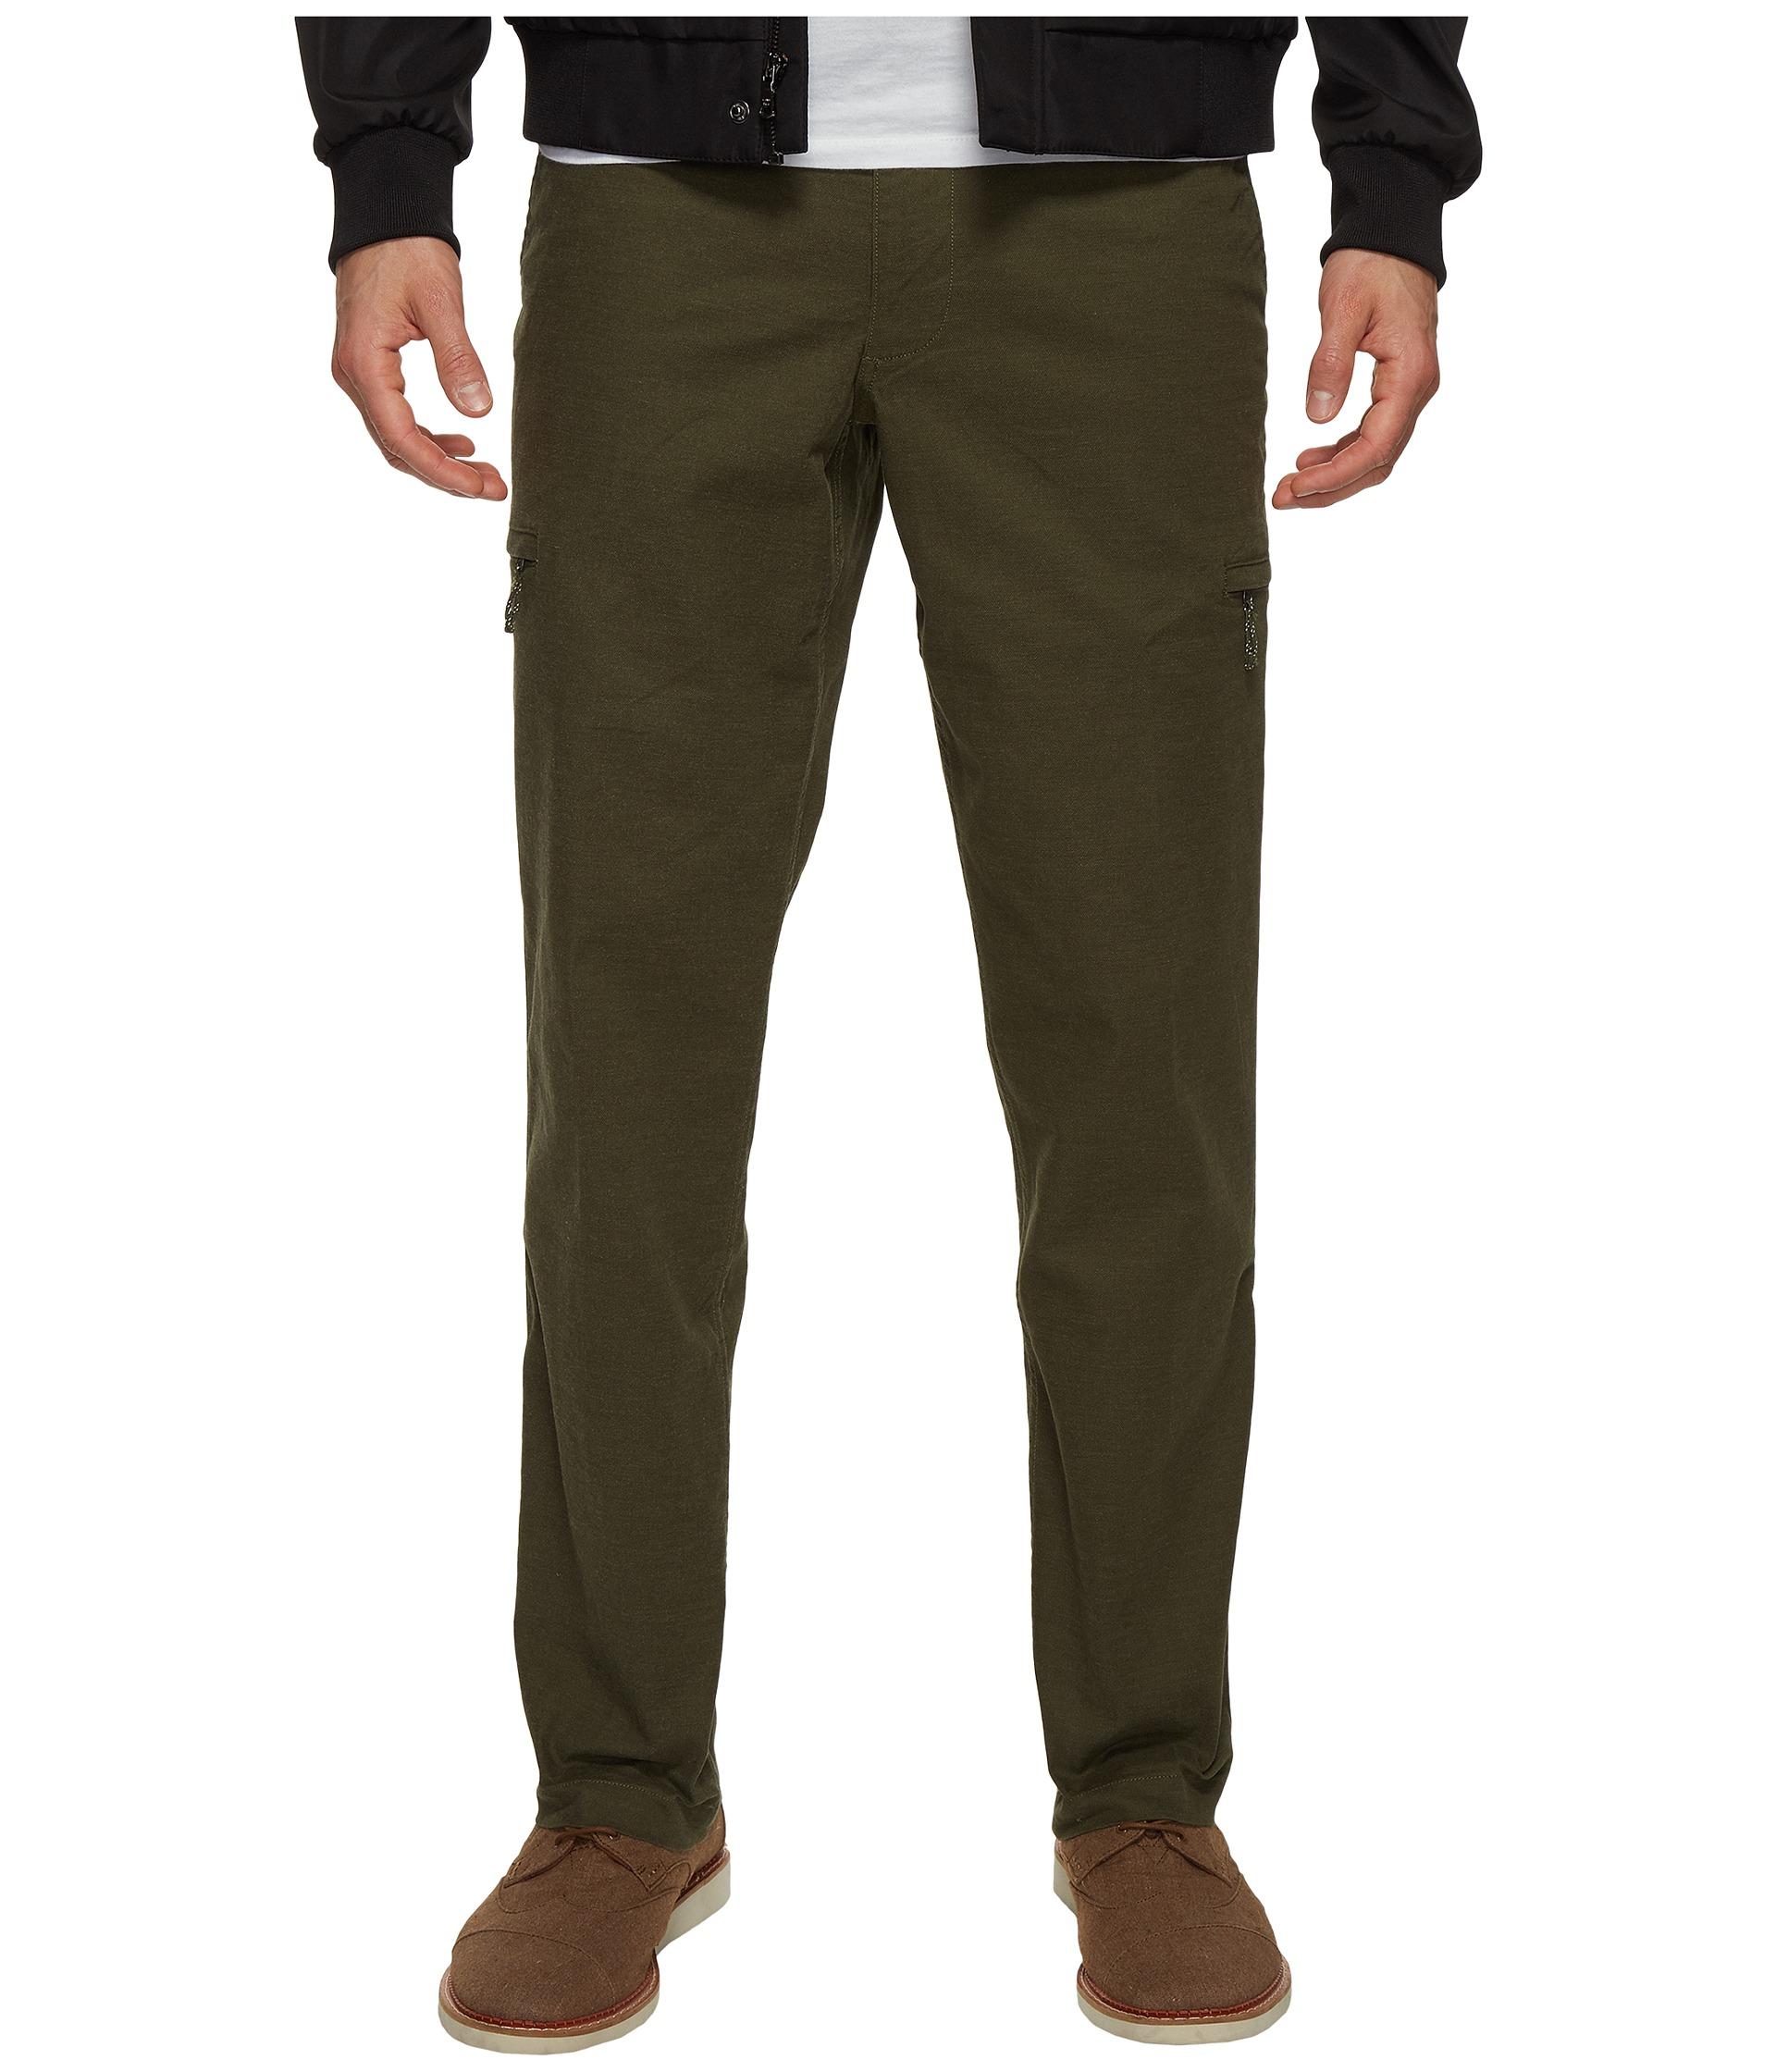 Lyst - Dockers Standard Utility Cargo Pants in Green for Men - Save 28%